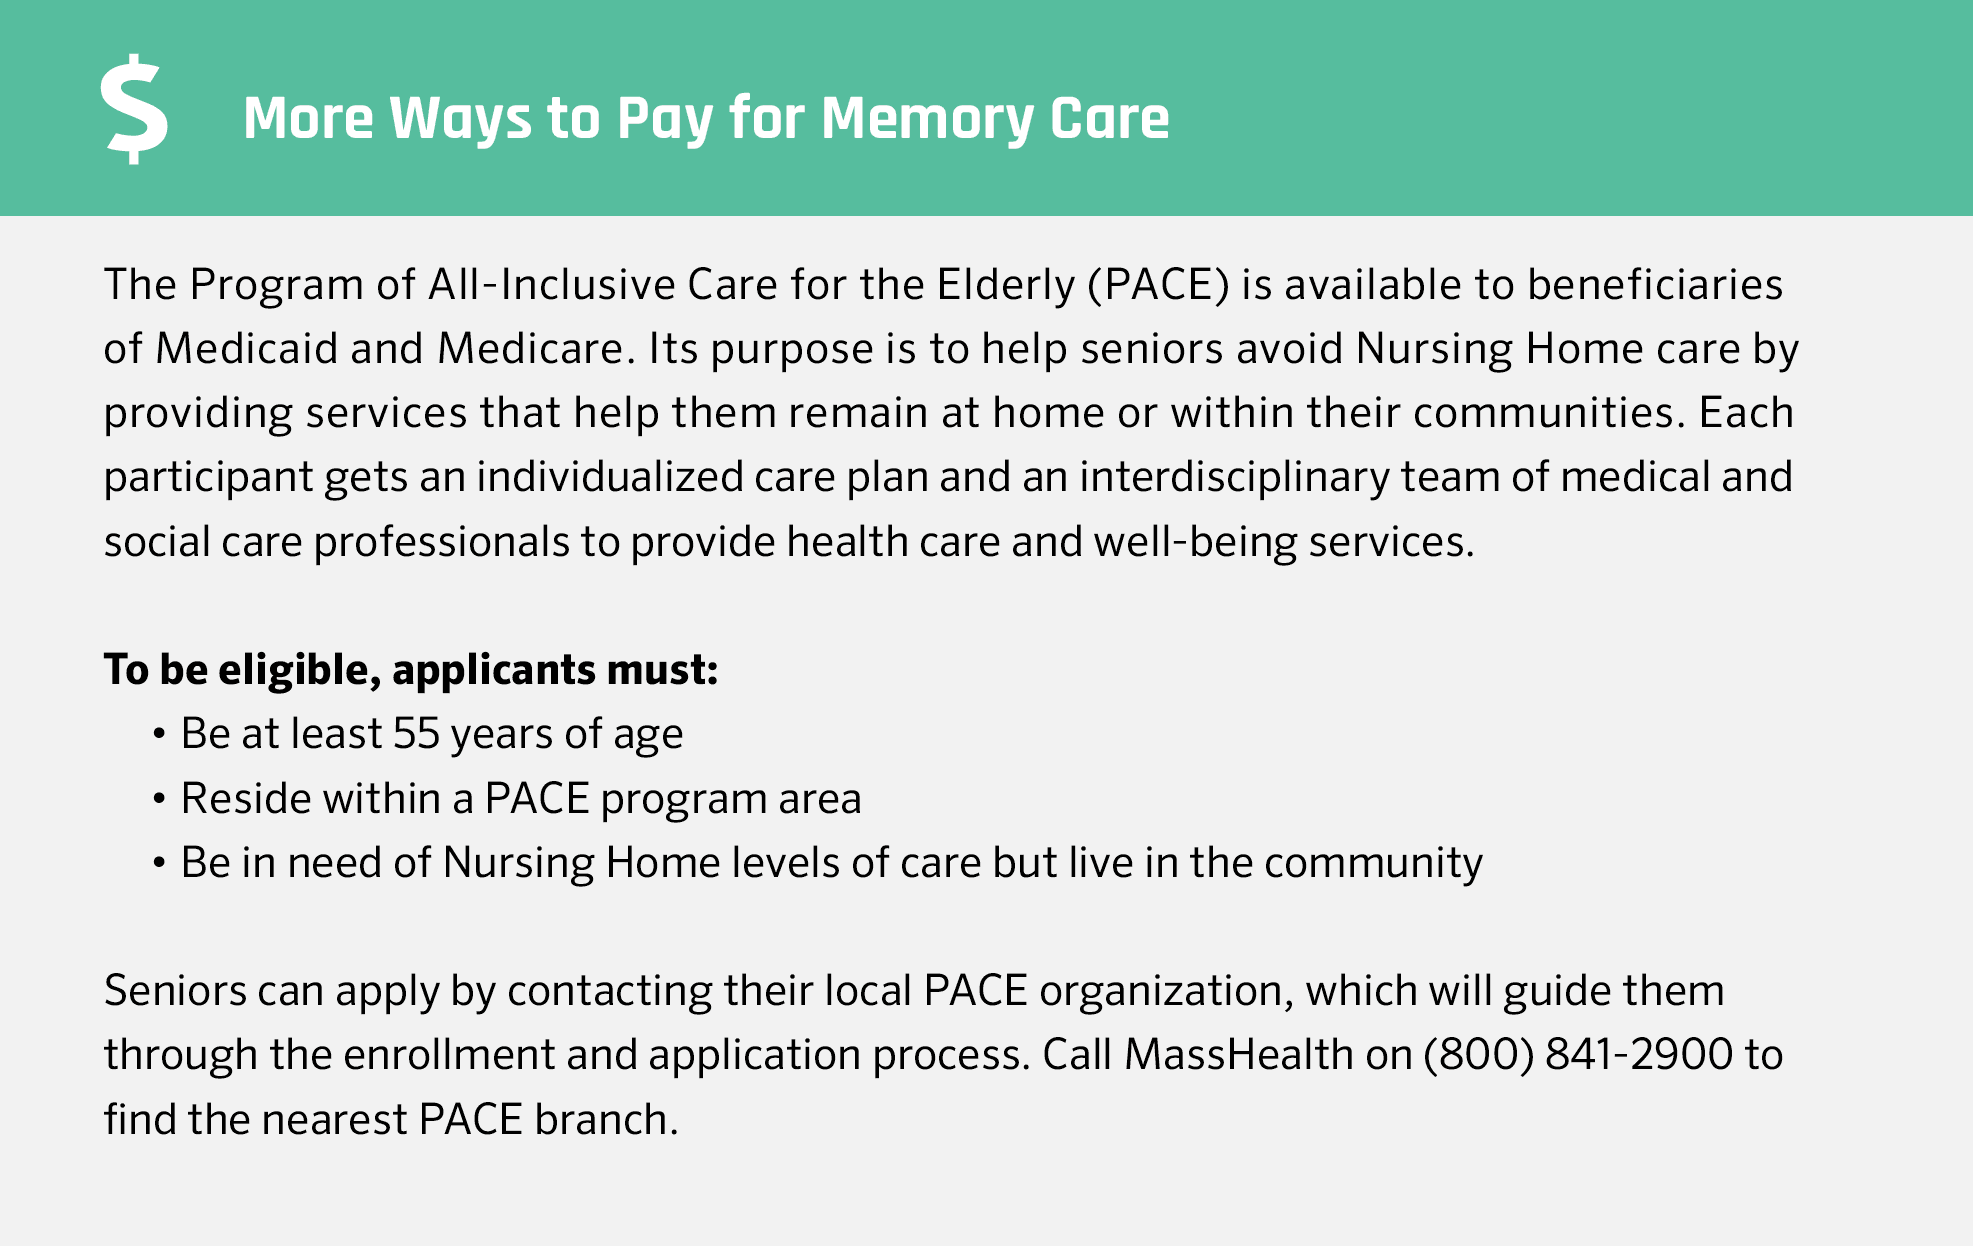 Financial Assistance for Memory Care in [state]